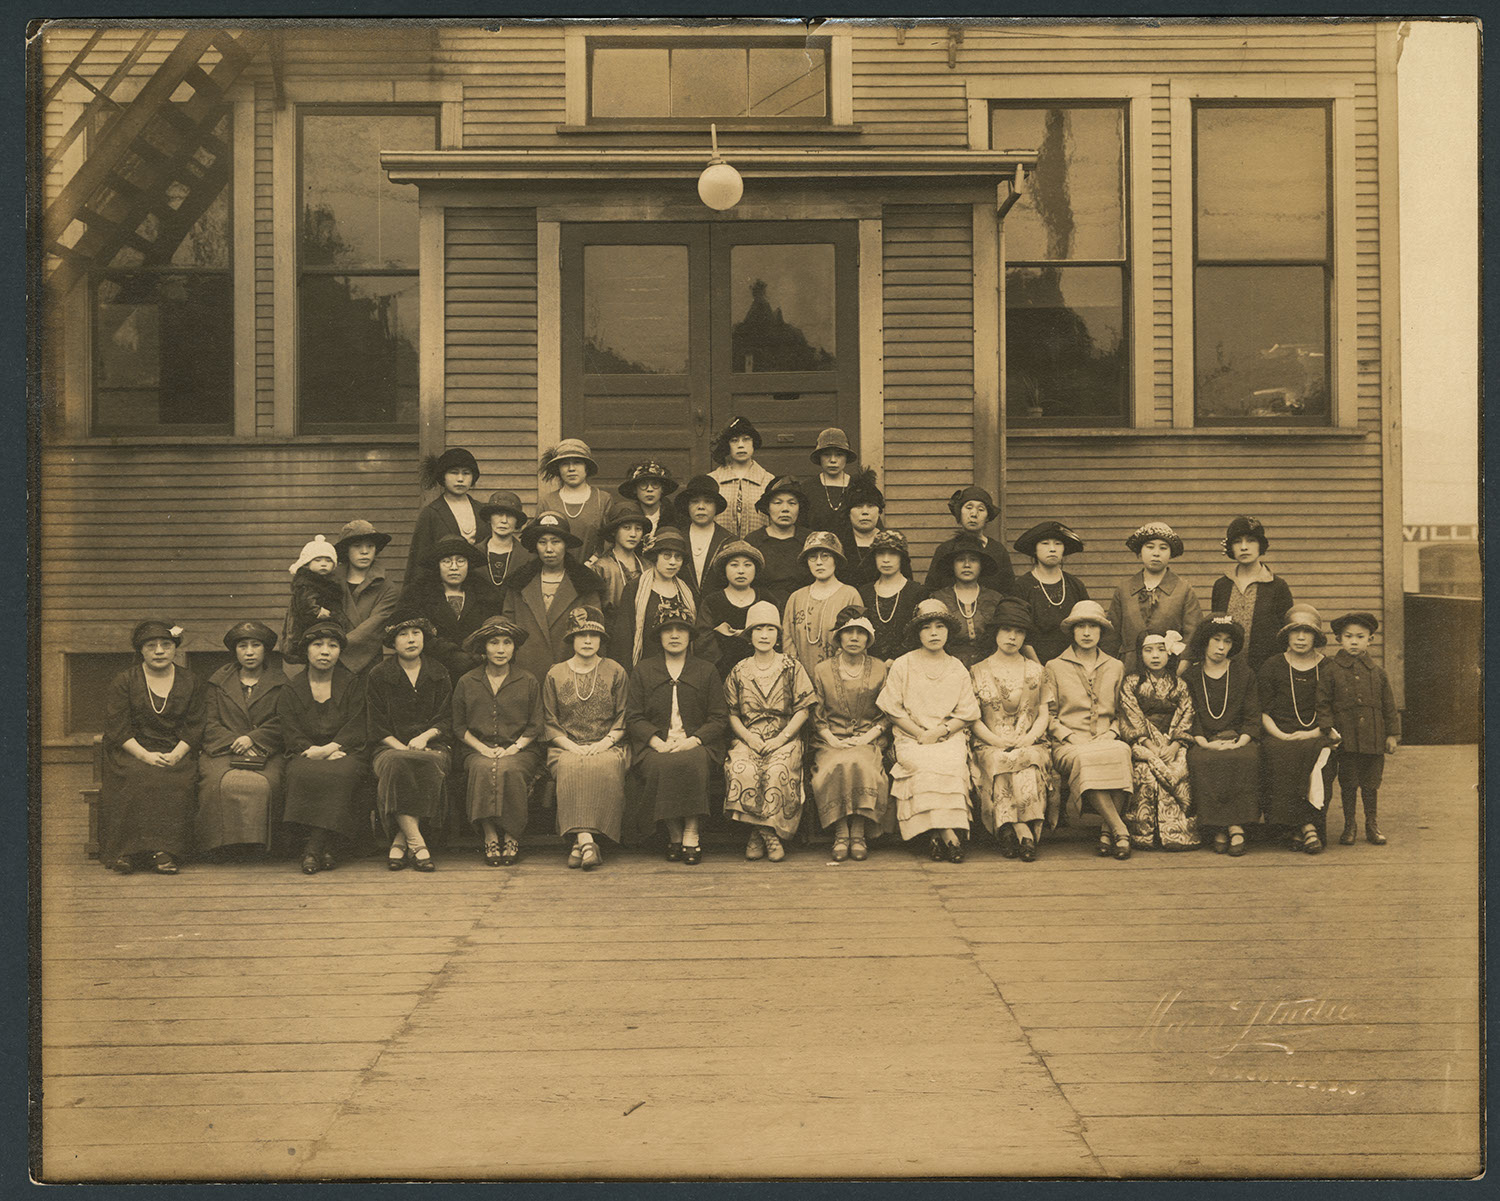 Women at the Vancouver Japanese Language School: Recto